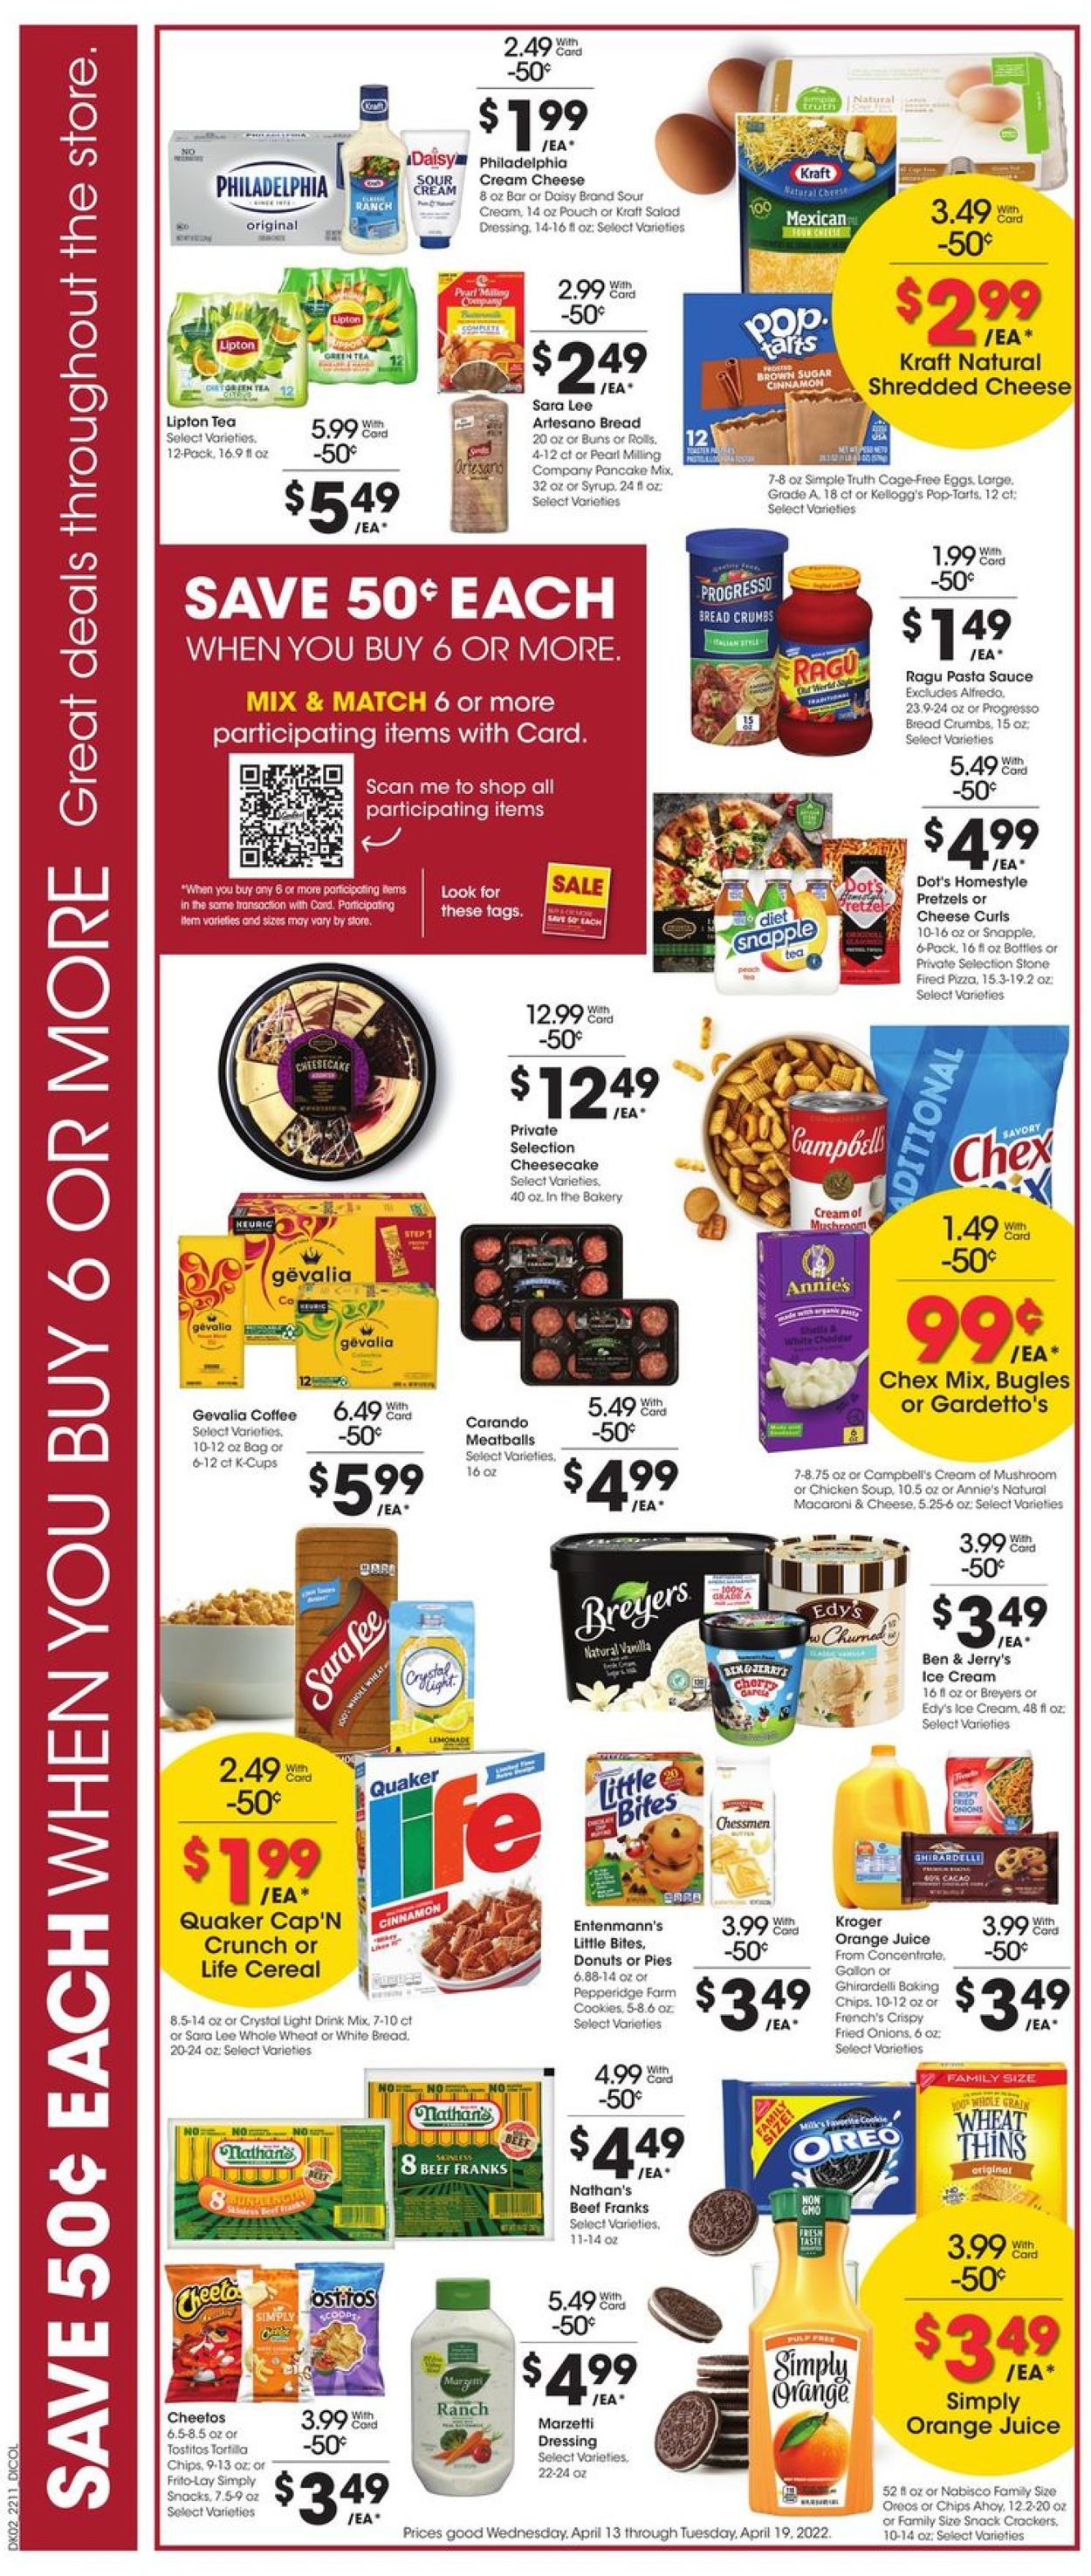 Gerbes Super Markets EASTER AD 2022 Weekly Ad Circular - valid 04/13-04/19/2022 (Page 4)